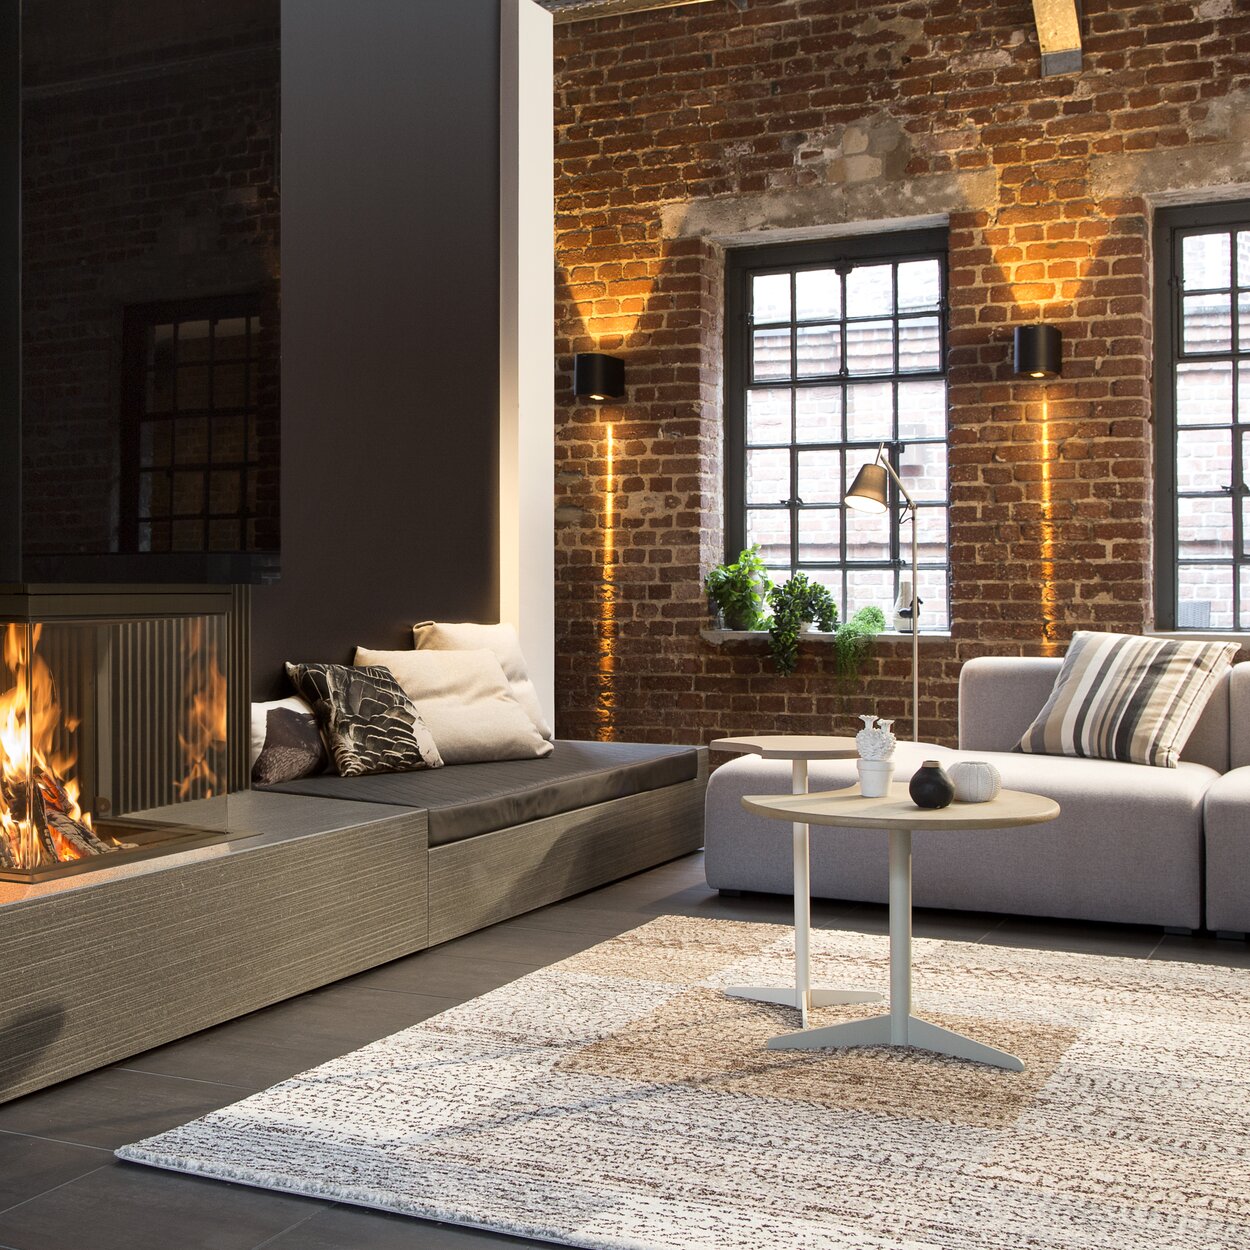 Wood fireplace W66/48S by Kalfire with 3-sided viewing windows in an industrial modernised flat